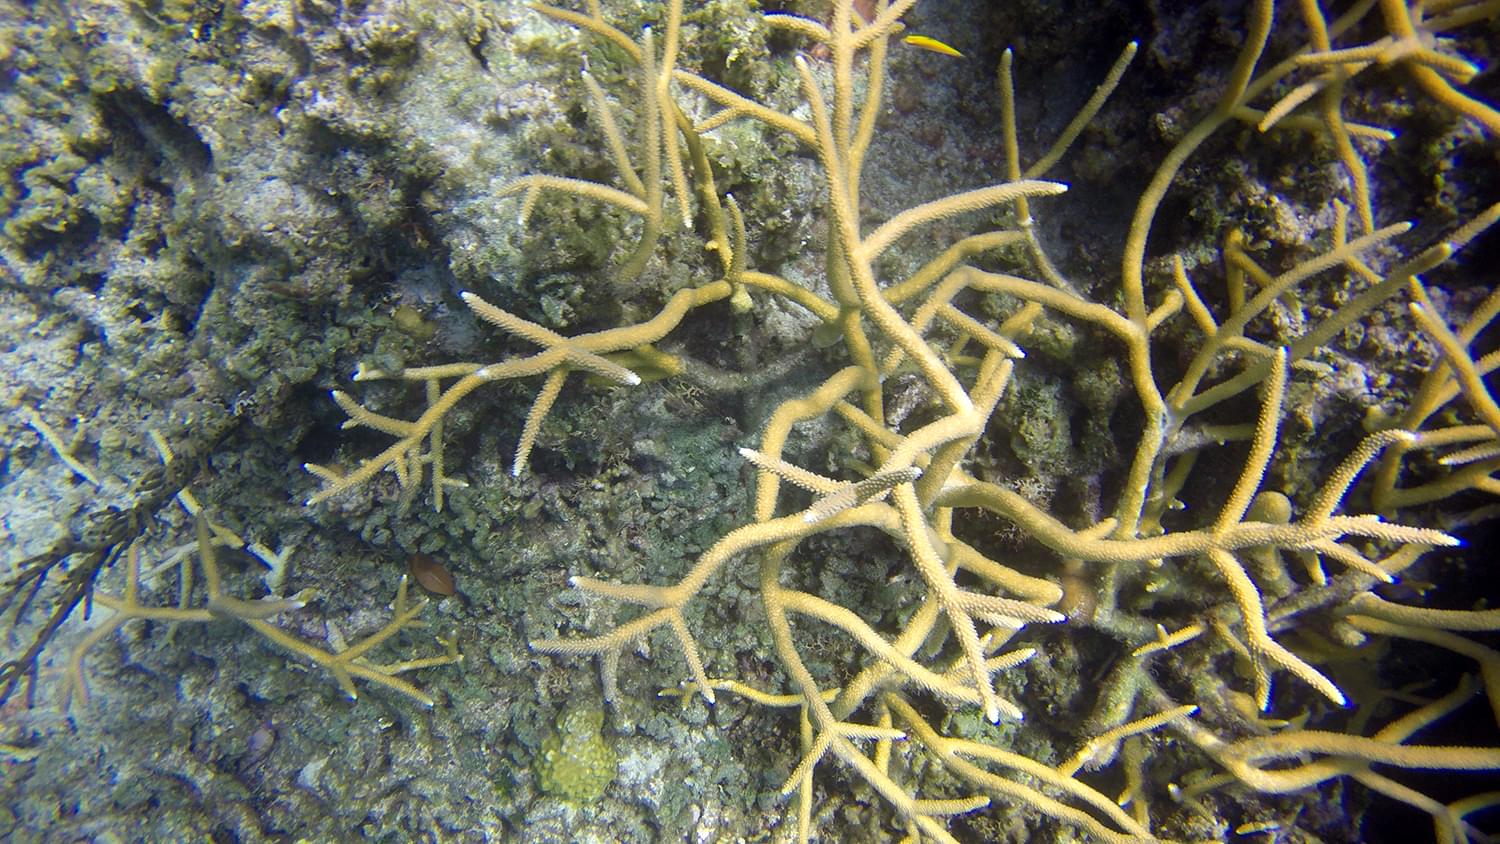 Staghorn coral colony